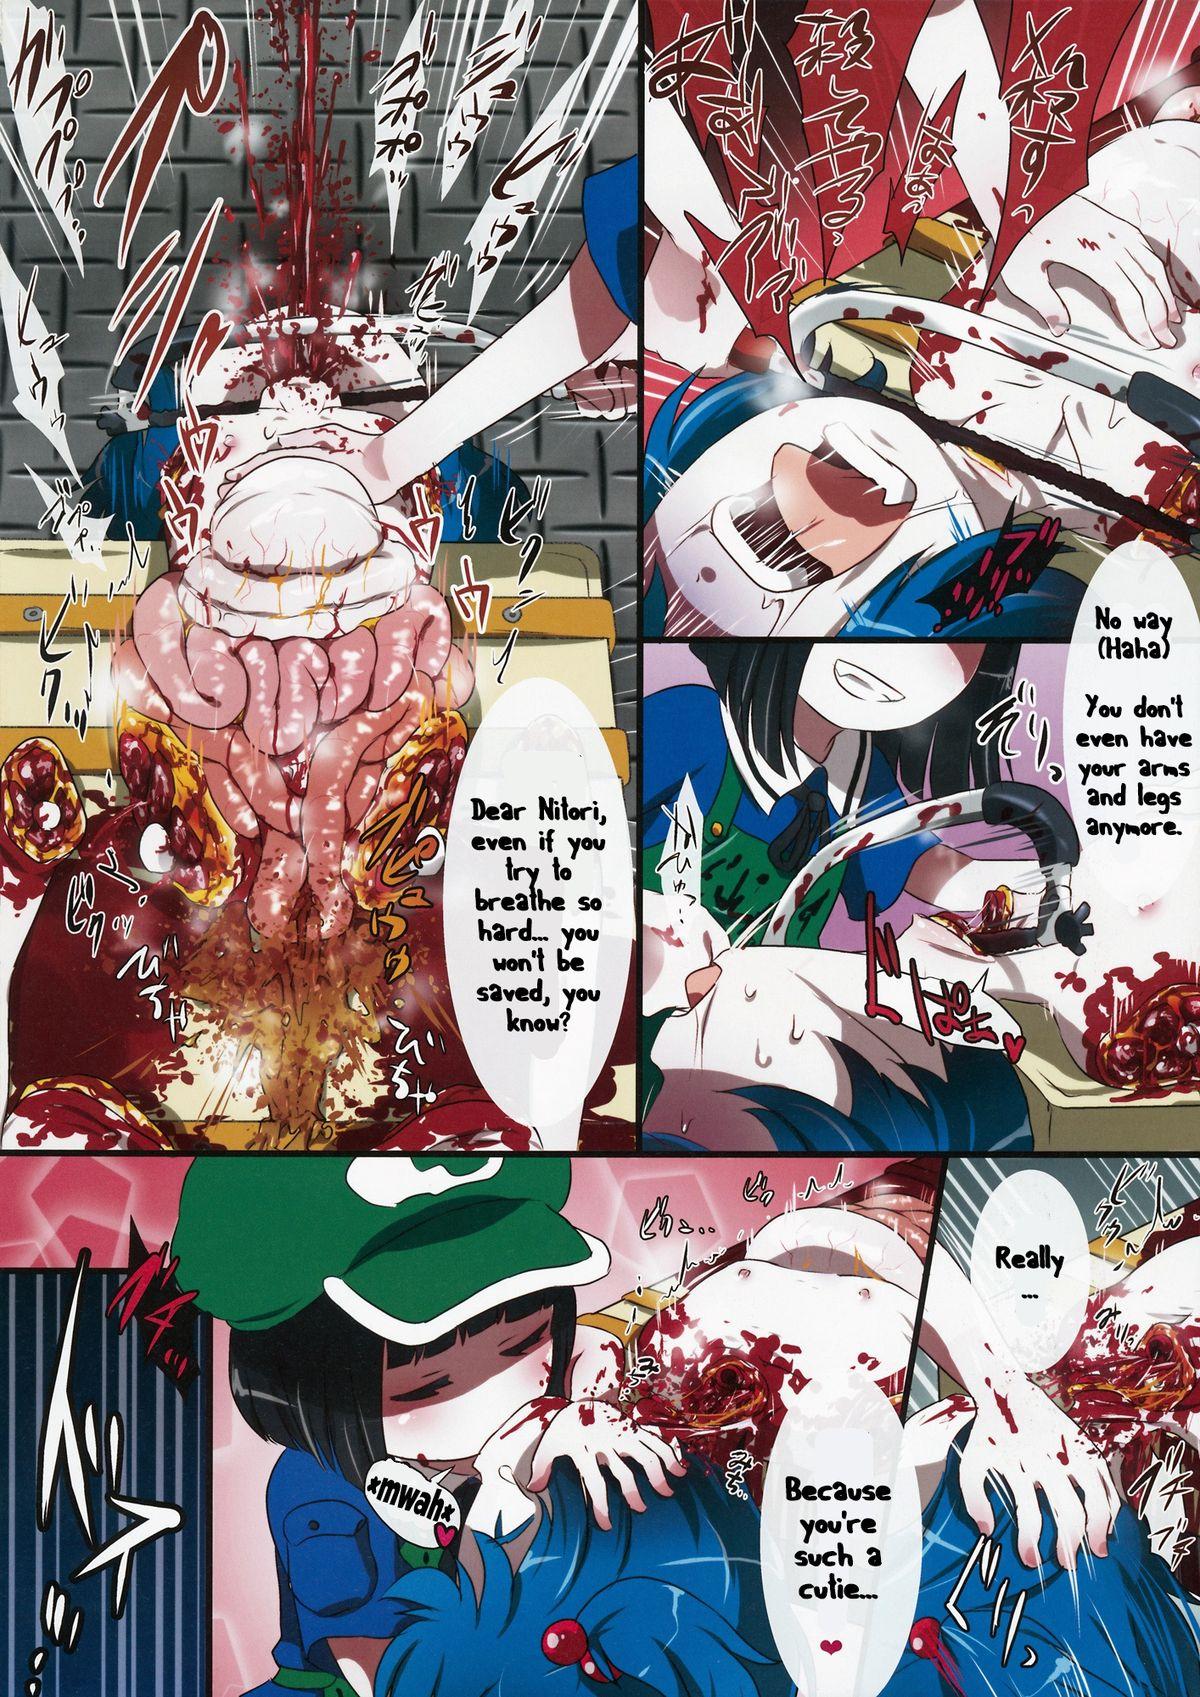 Spying 0210564801 - Touhou project Licking Pussy - Page 8